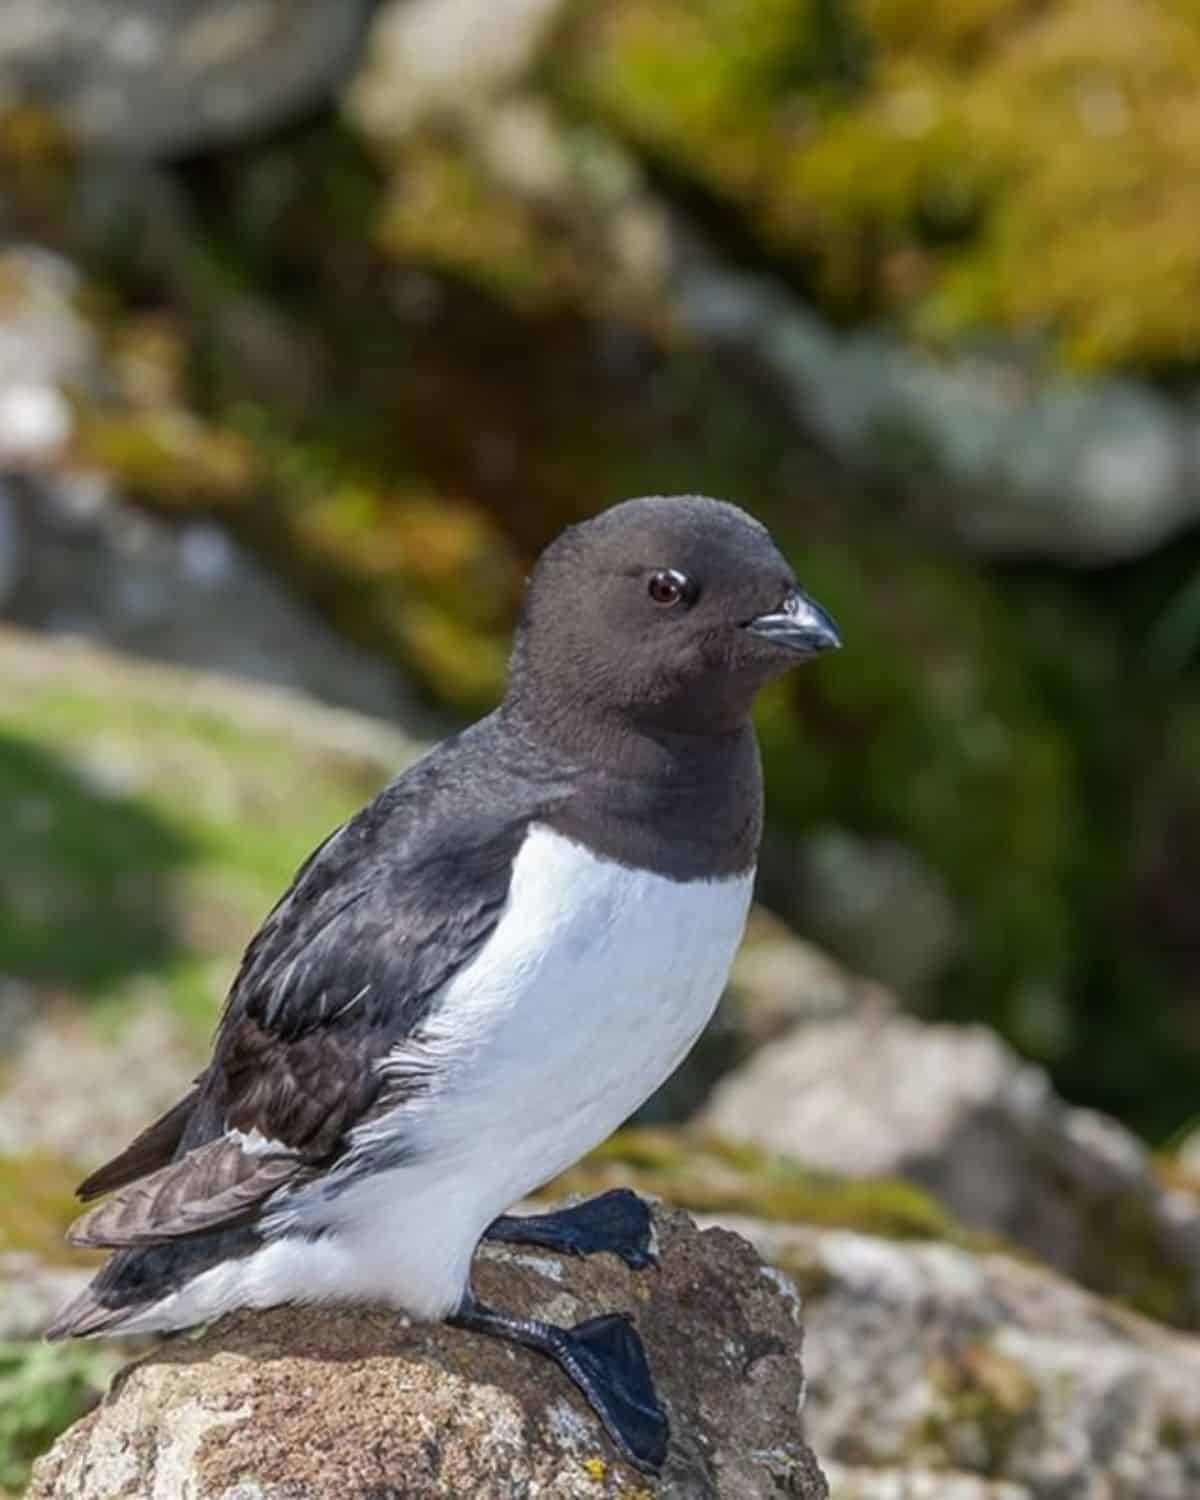 An adorable Dovekie perched on a rock.